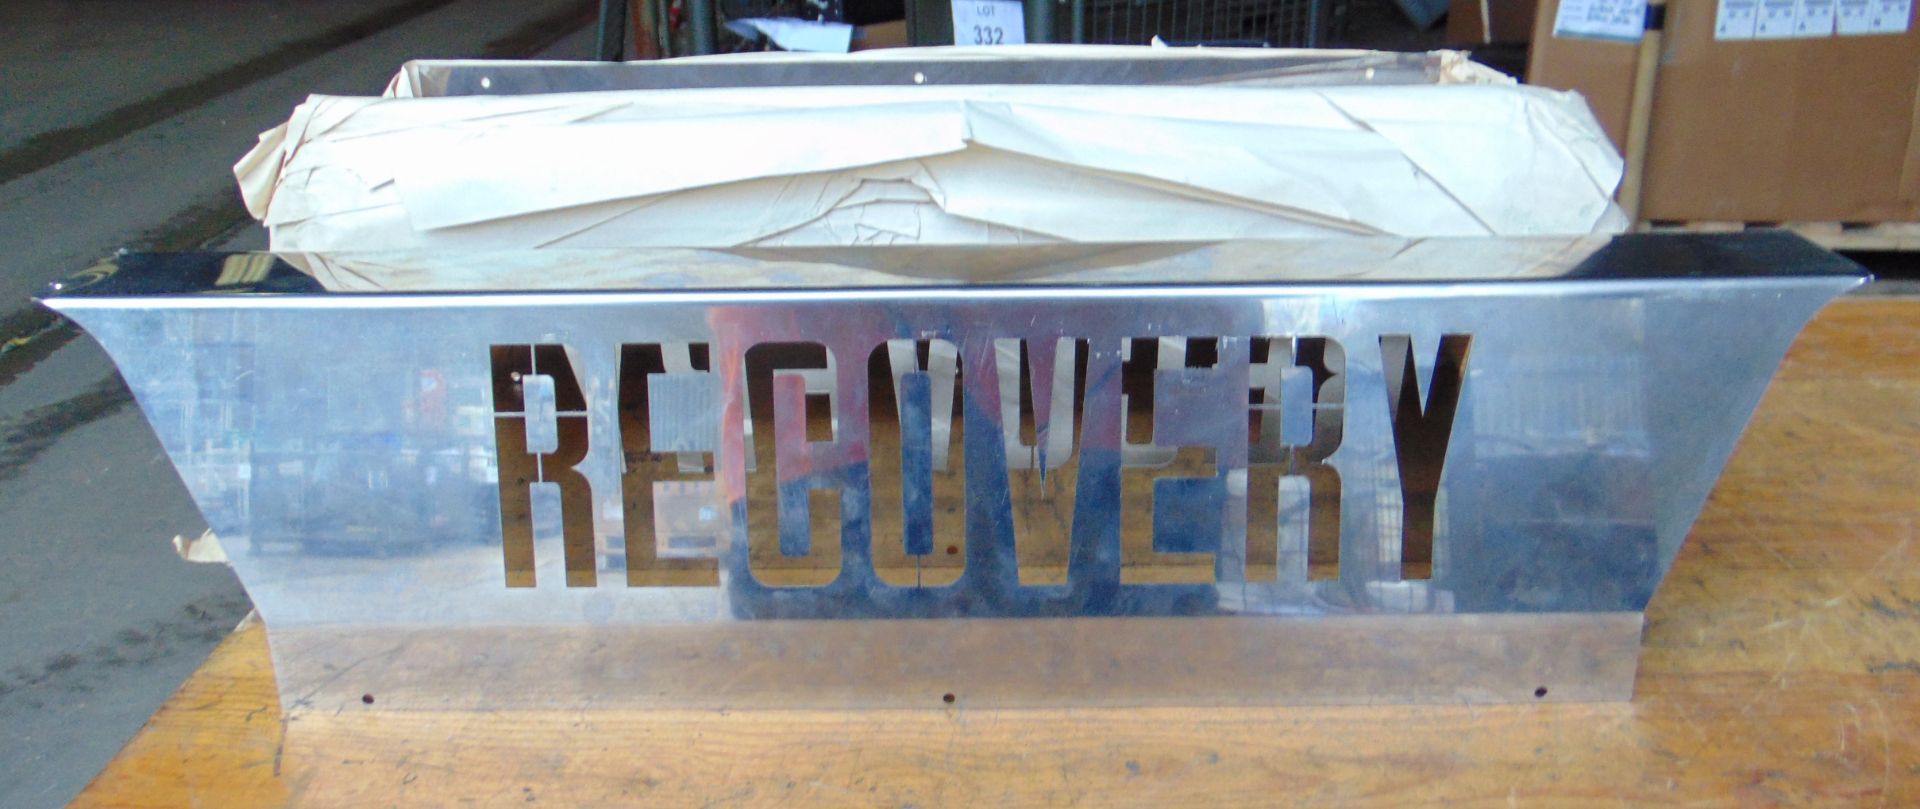 10 x Stainless Steel "RECOVERY" Signs - Image 3 of 6